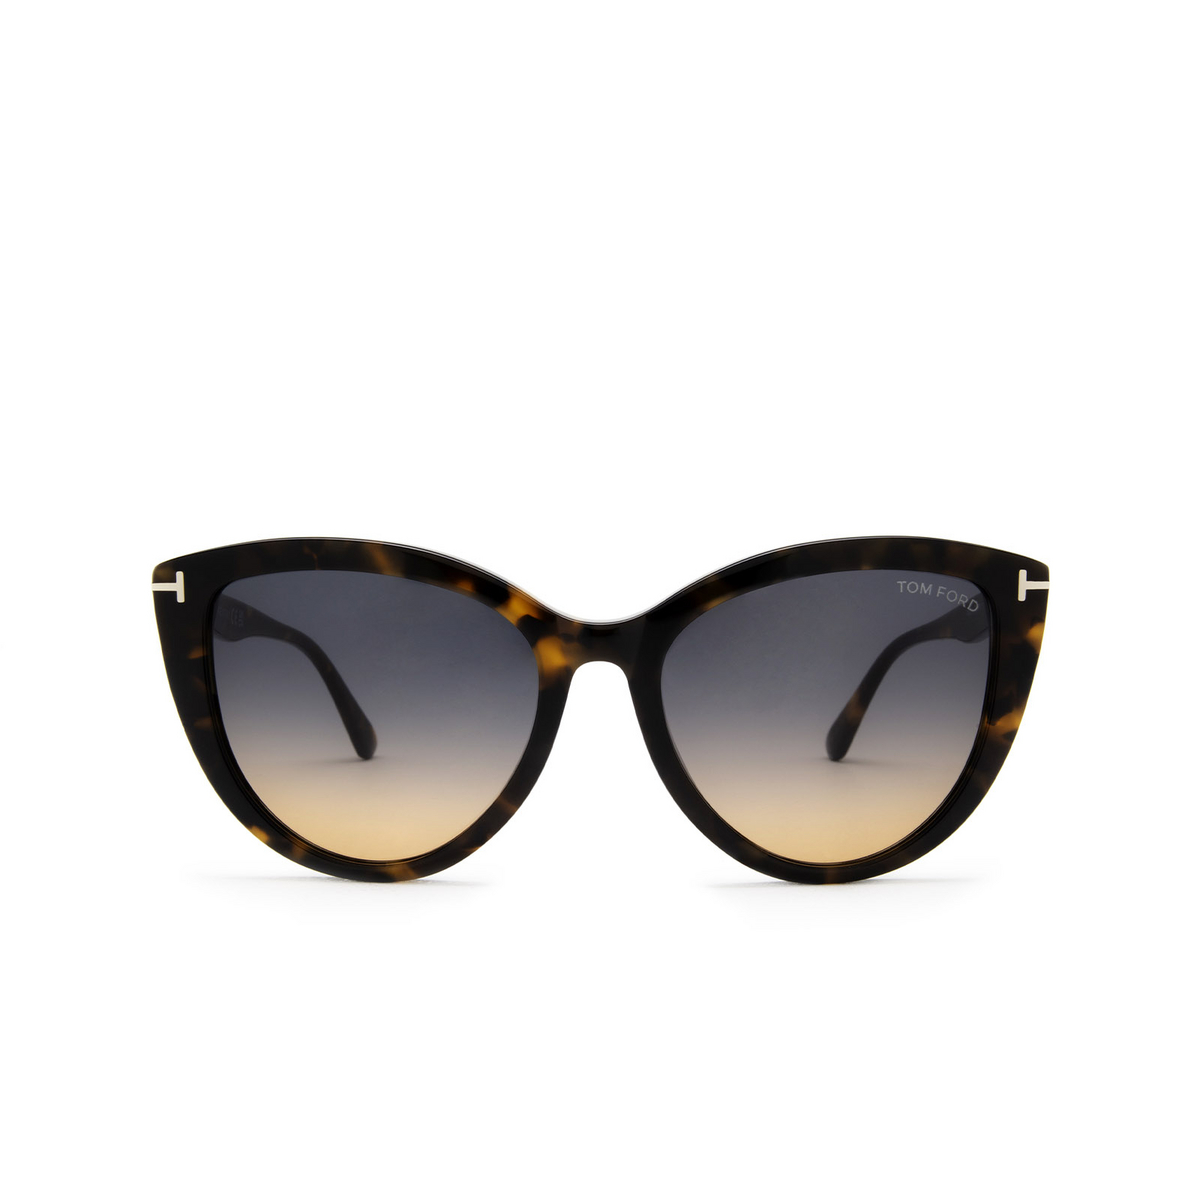 Tom Ford ISABELLA-02 Sunglasses 55P Havana - front view